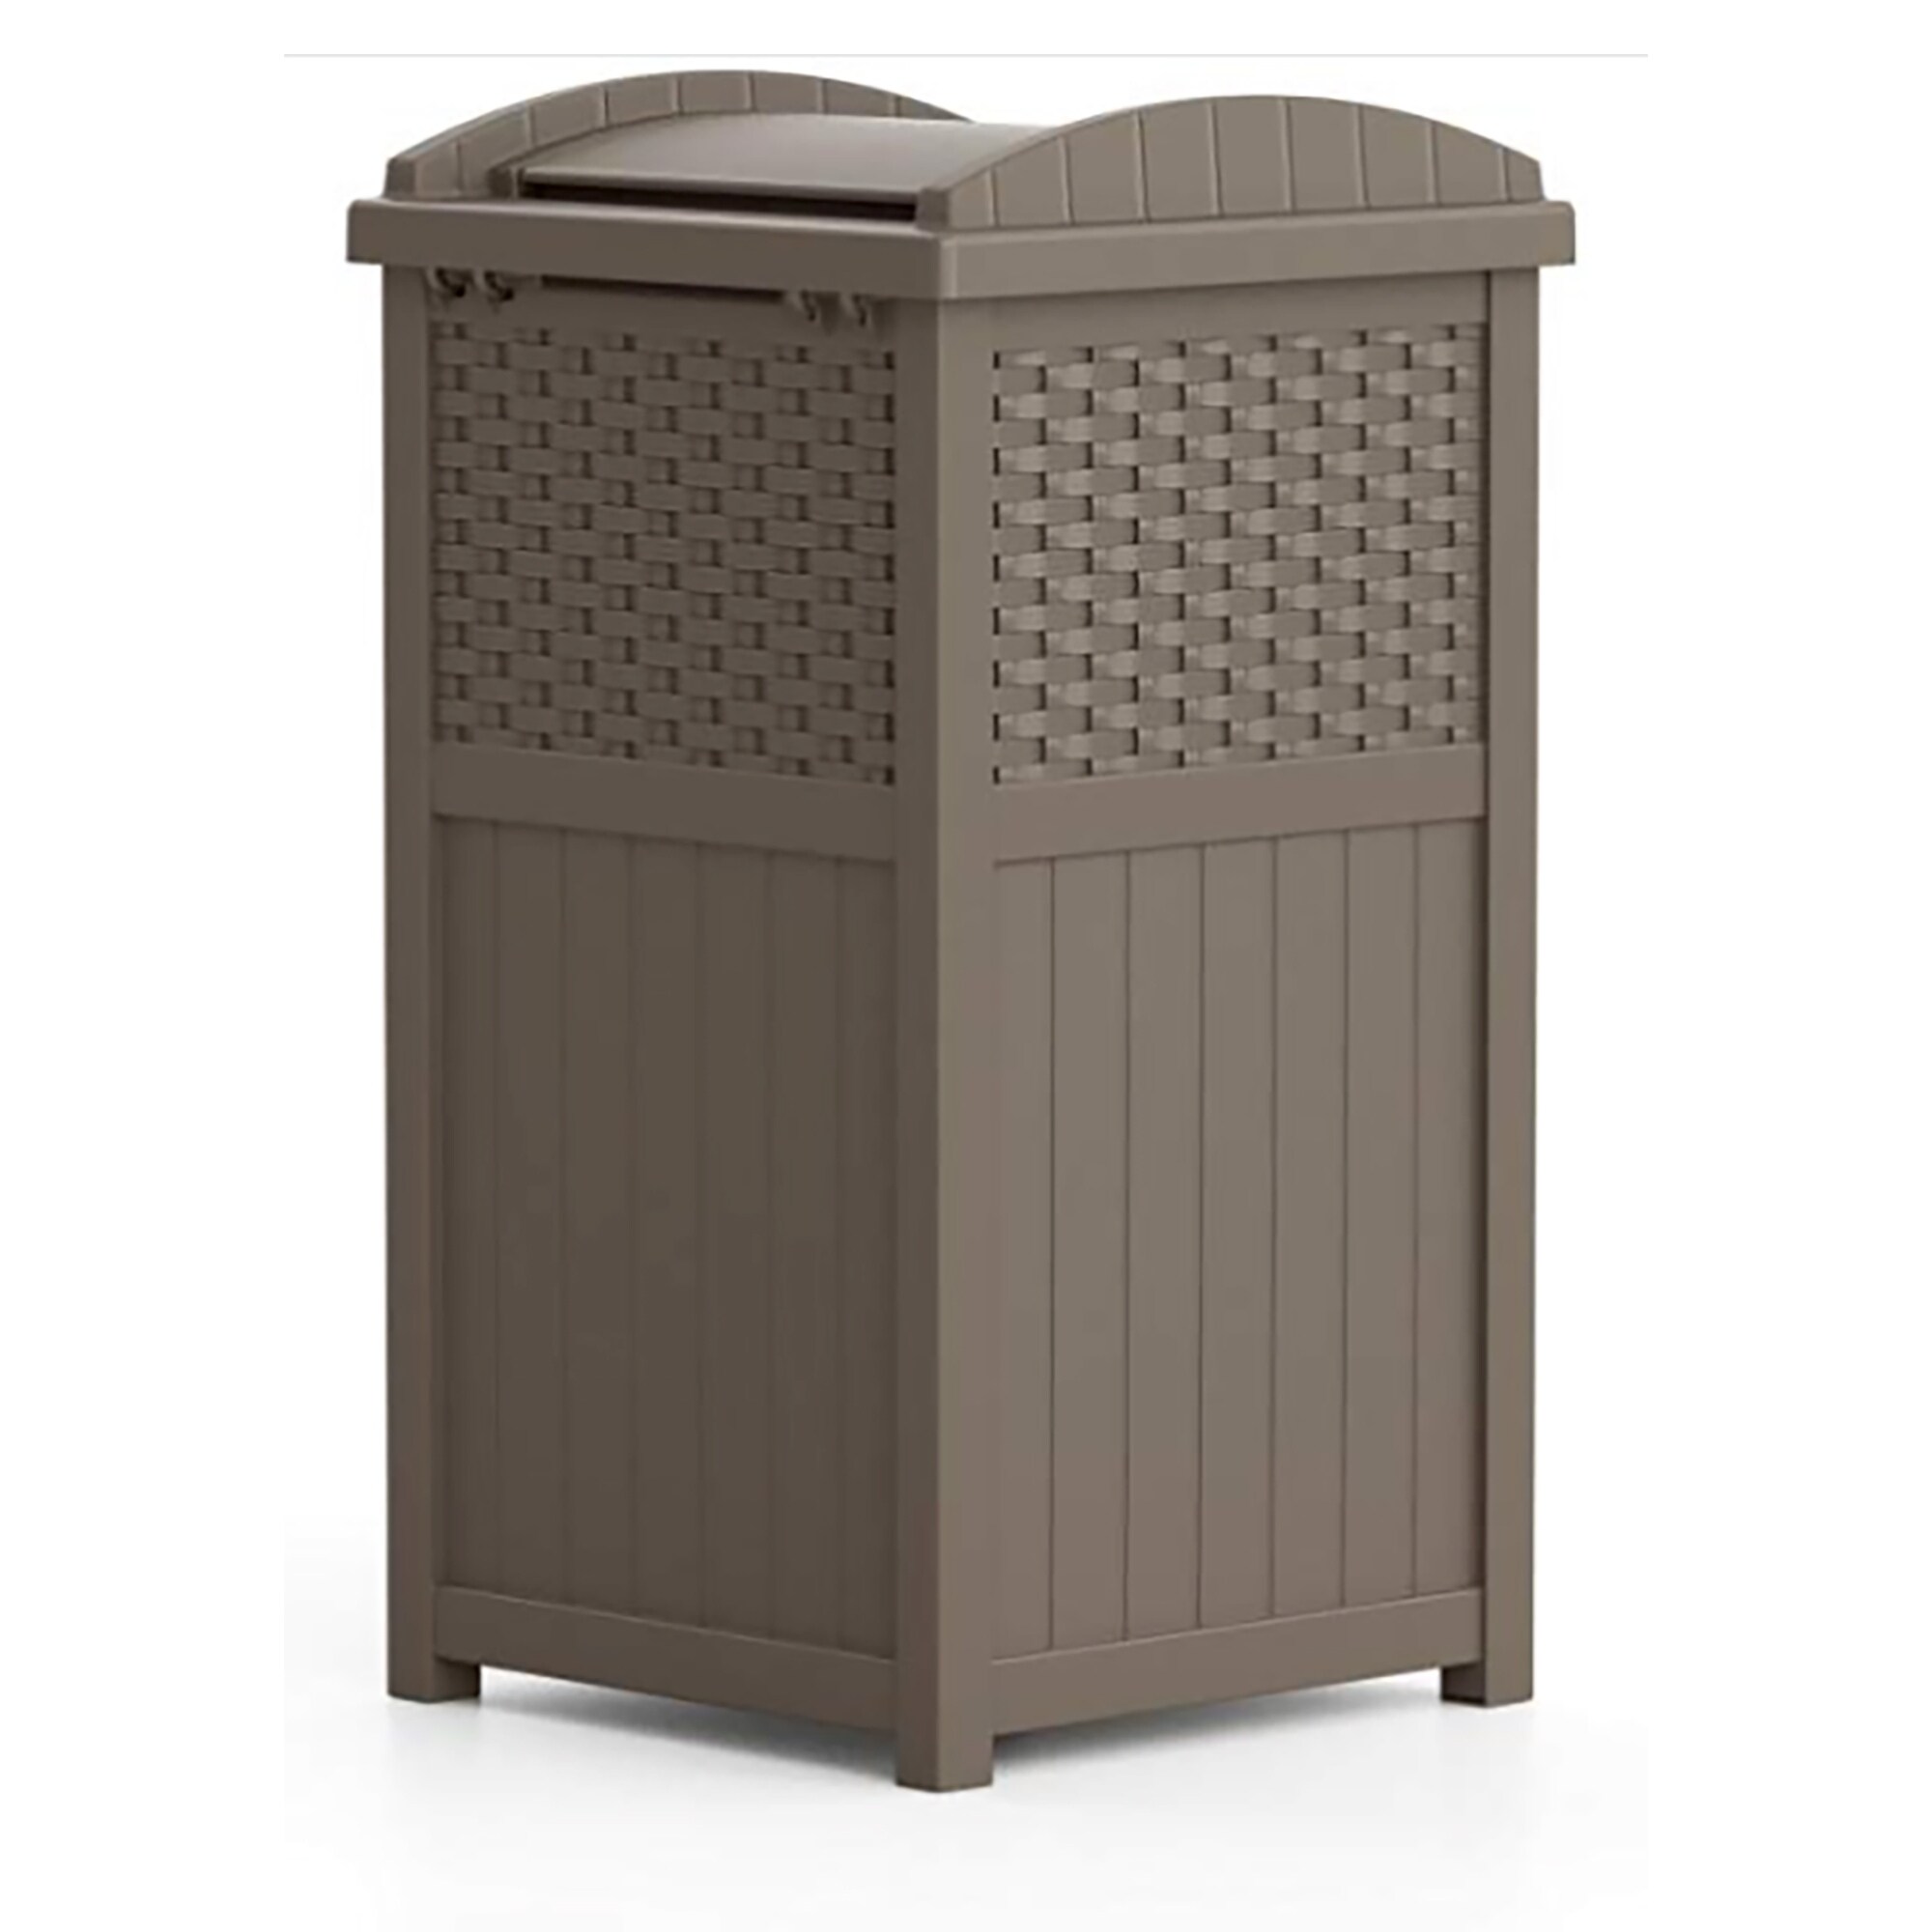 Superio Kitchen Trash Can 13 Gallon with Swing Lid, Plastic Tall Garbage  Can Outdoor and Indoor, Large 52 Qt Recycle Bin and Waste Basket for Home